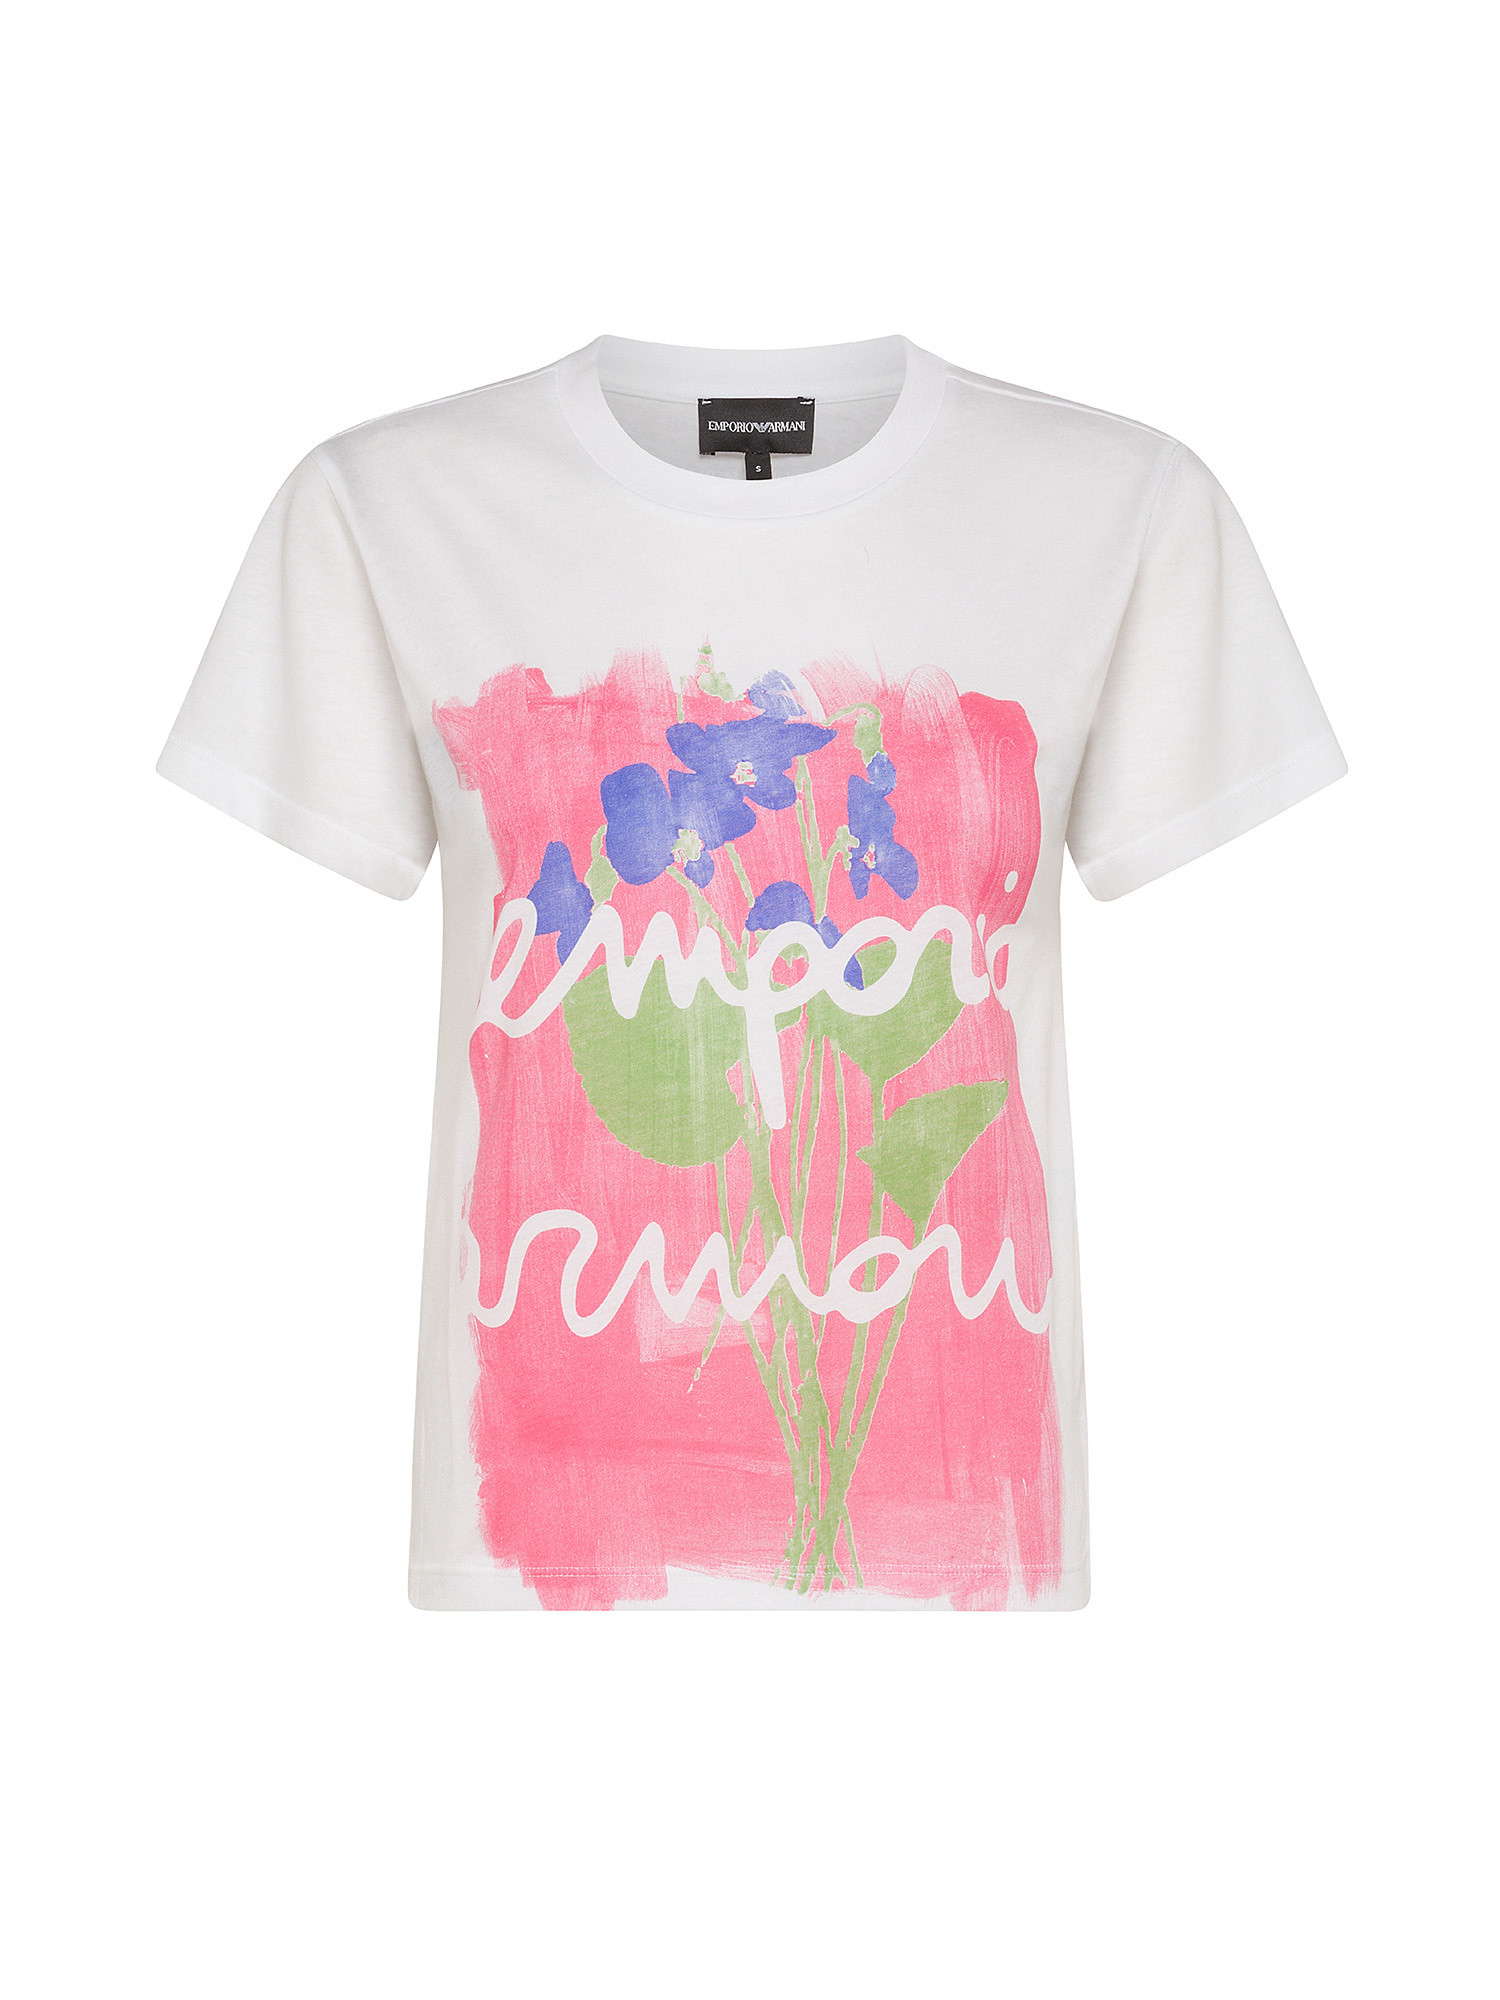 Emporio Armani - Crew neck T-shirt with watercolor print, White, large image number 0